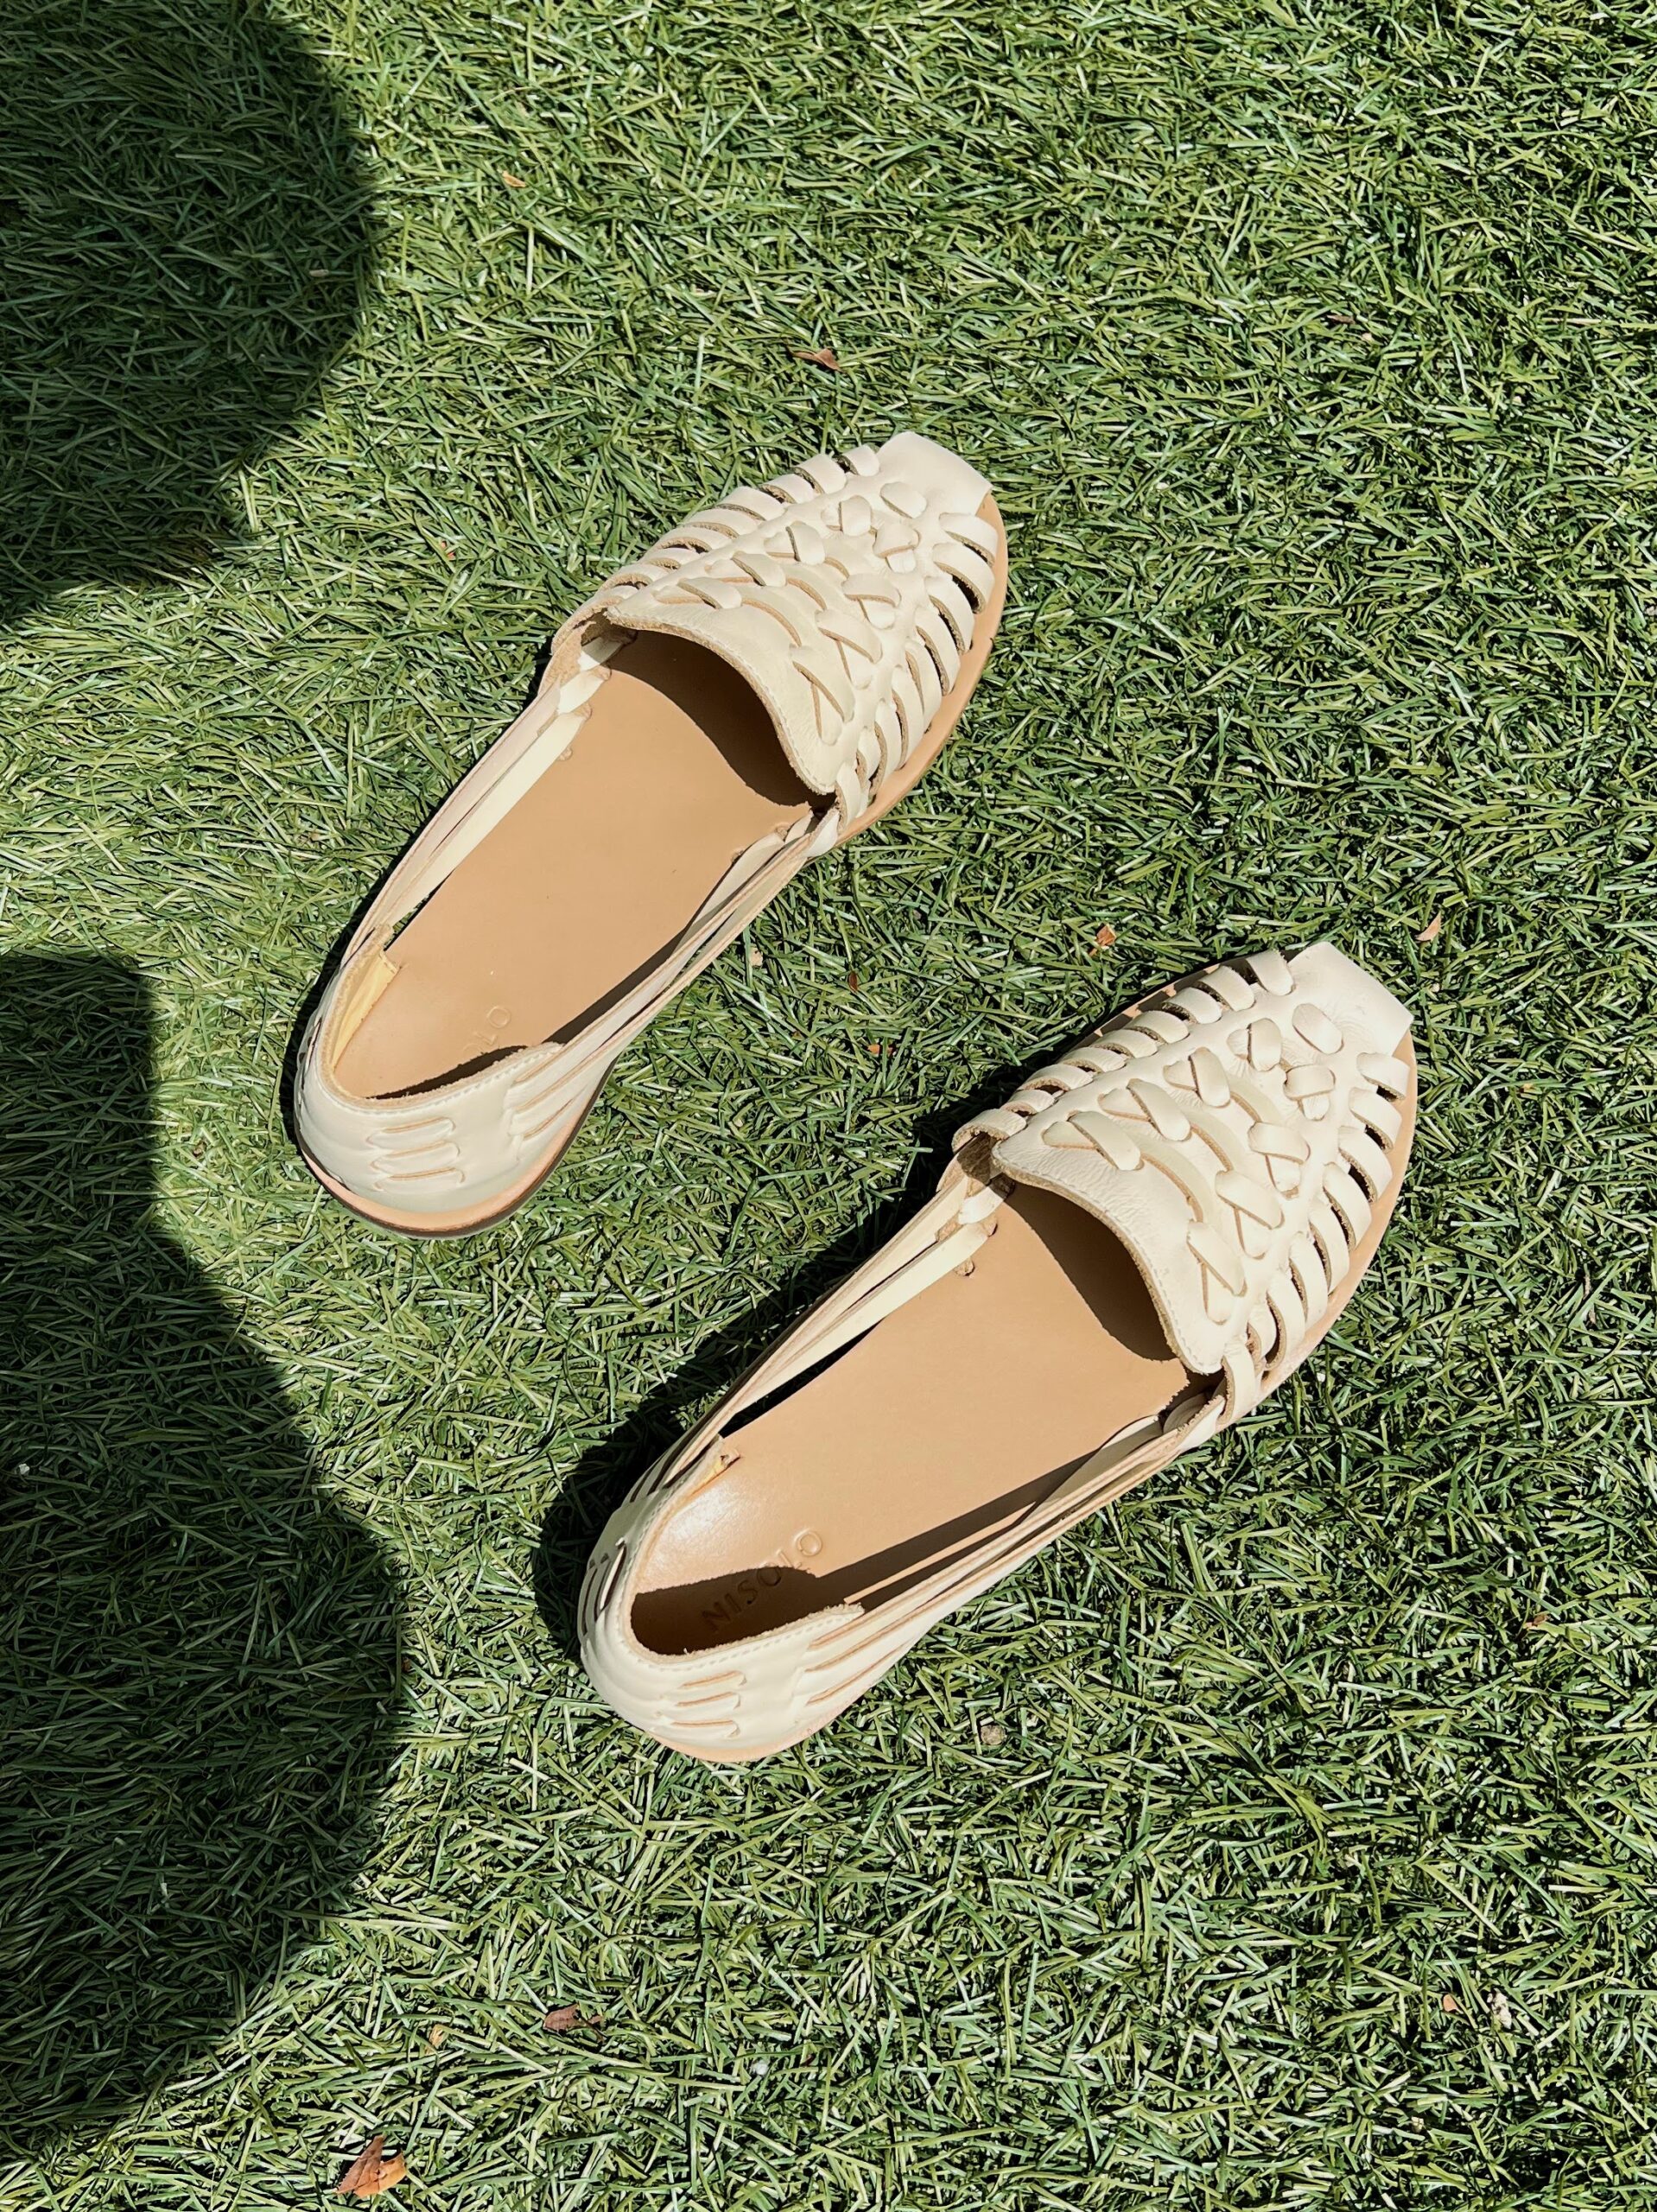 A pair of light-colored woven huarache sandals resting on a grassy surface, with shadows partially visible in the bottom left corner.